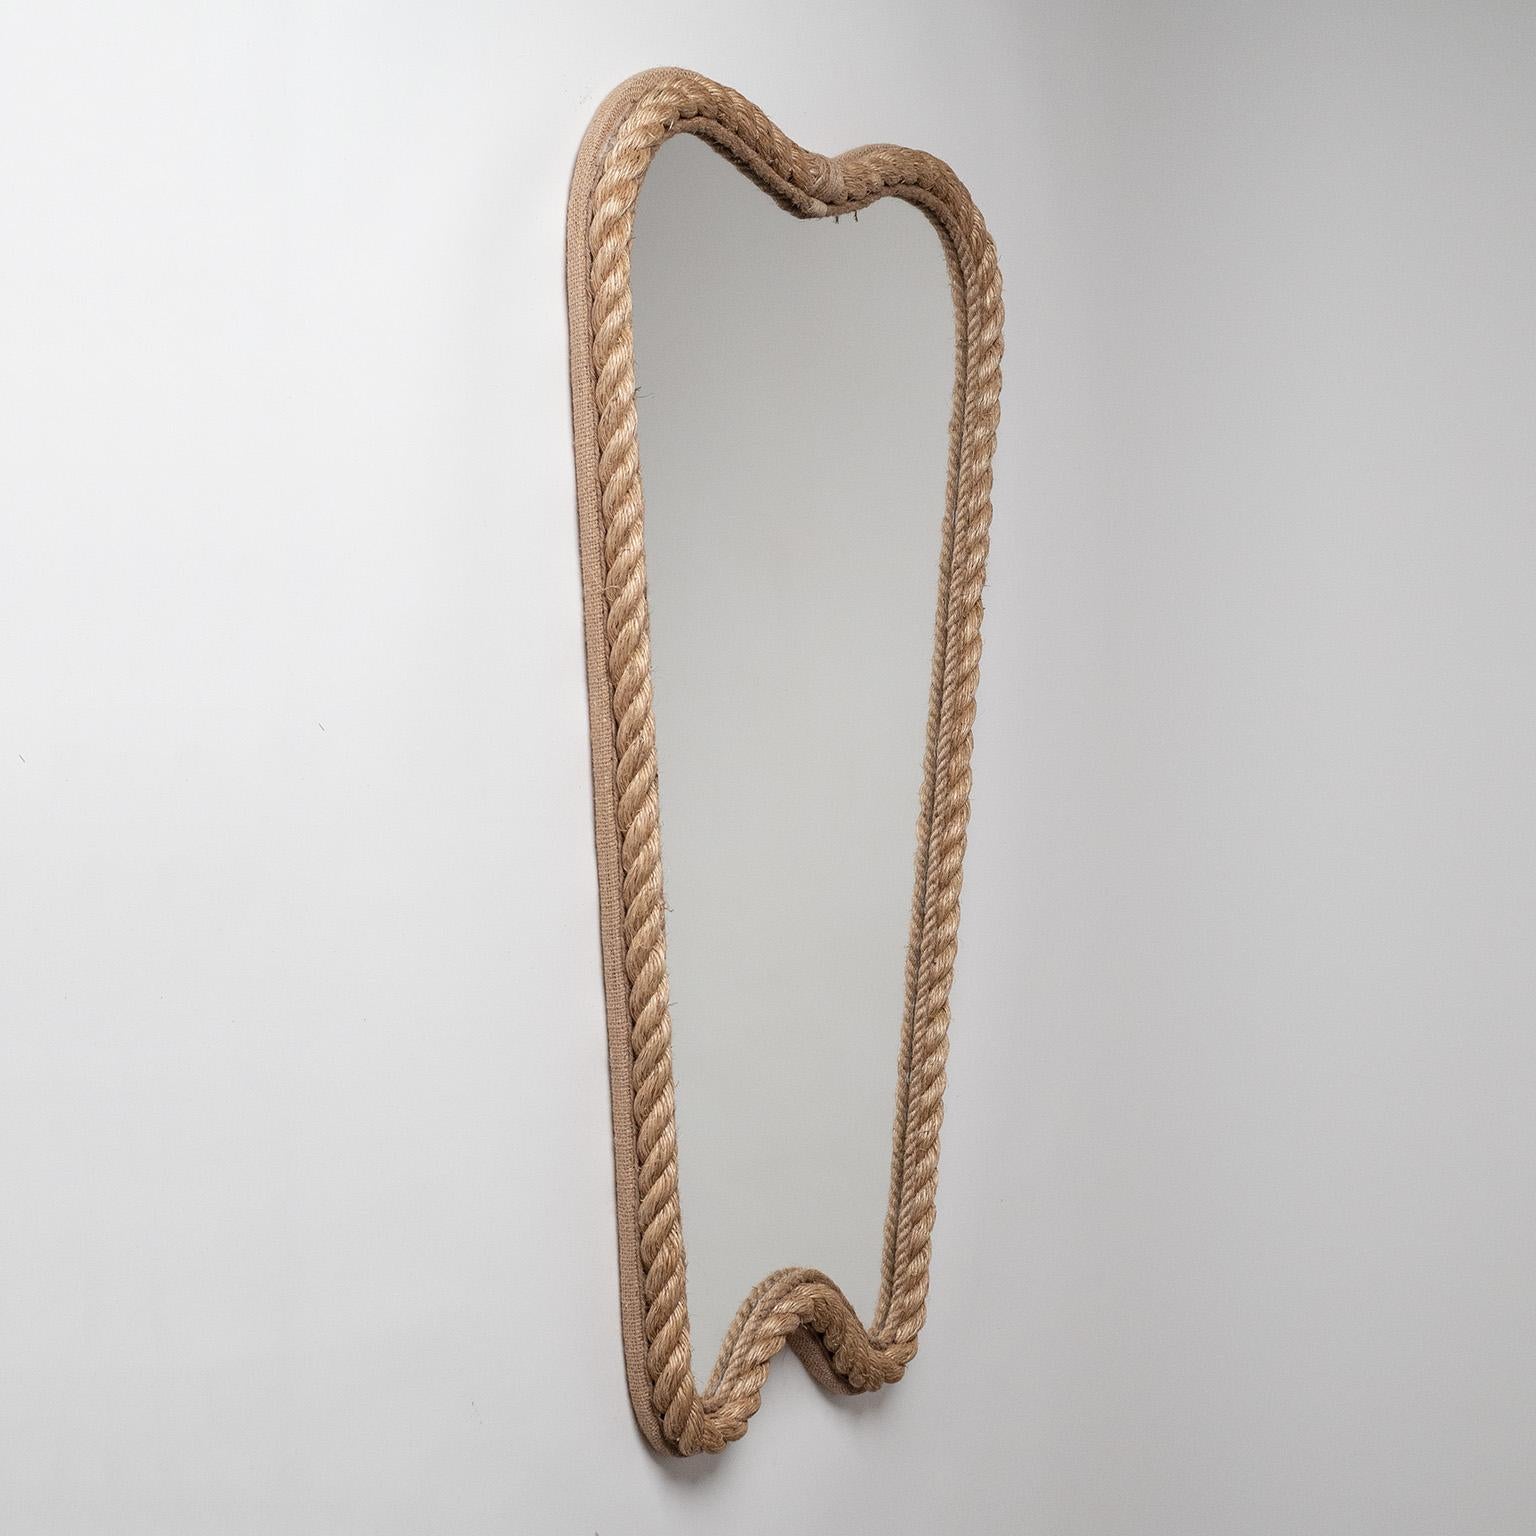 Contemporary French Rope Mirror in the Style of Audoux & Minet